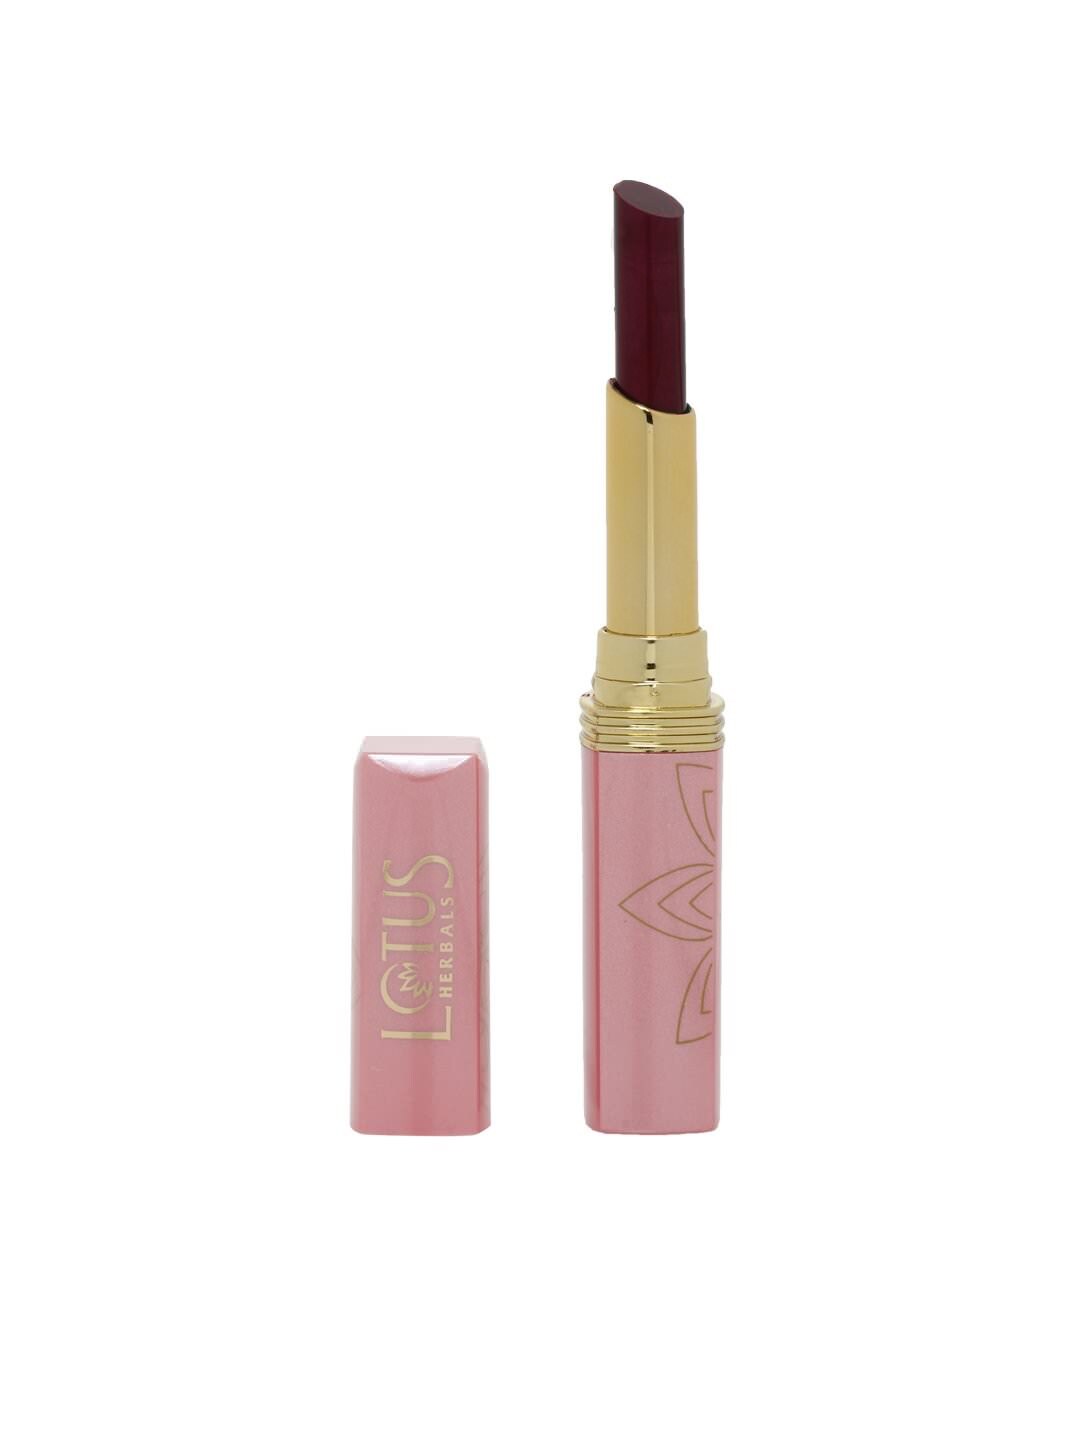 Lotus Herbals Floralstay Truffle Story Lip Color 423